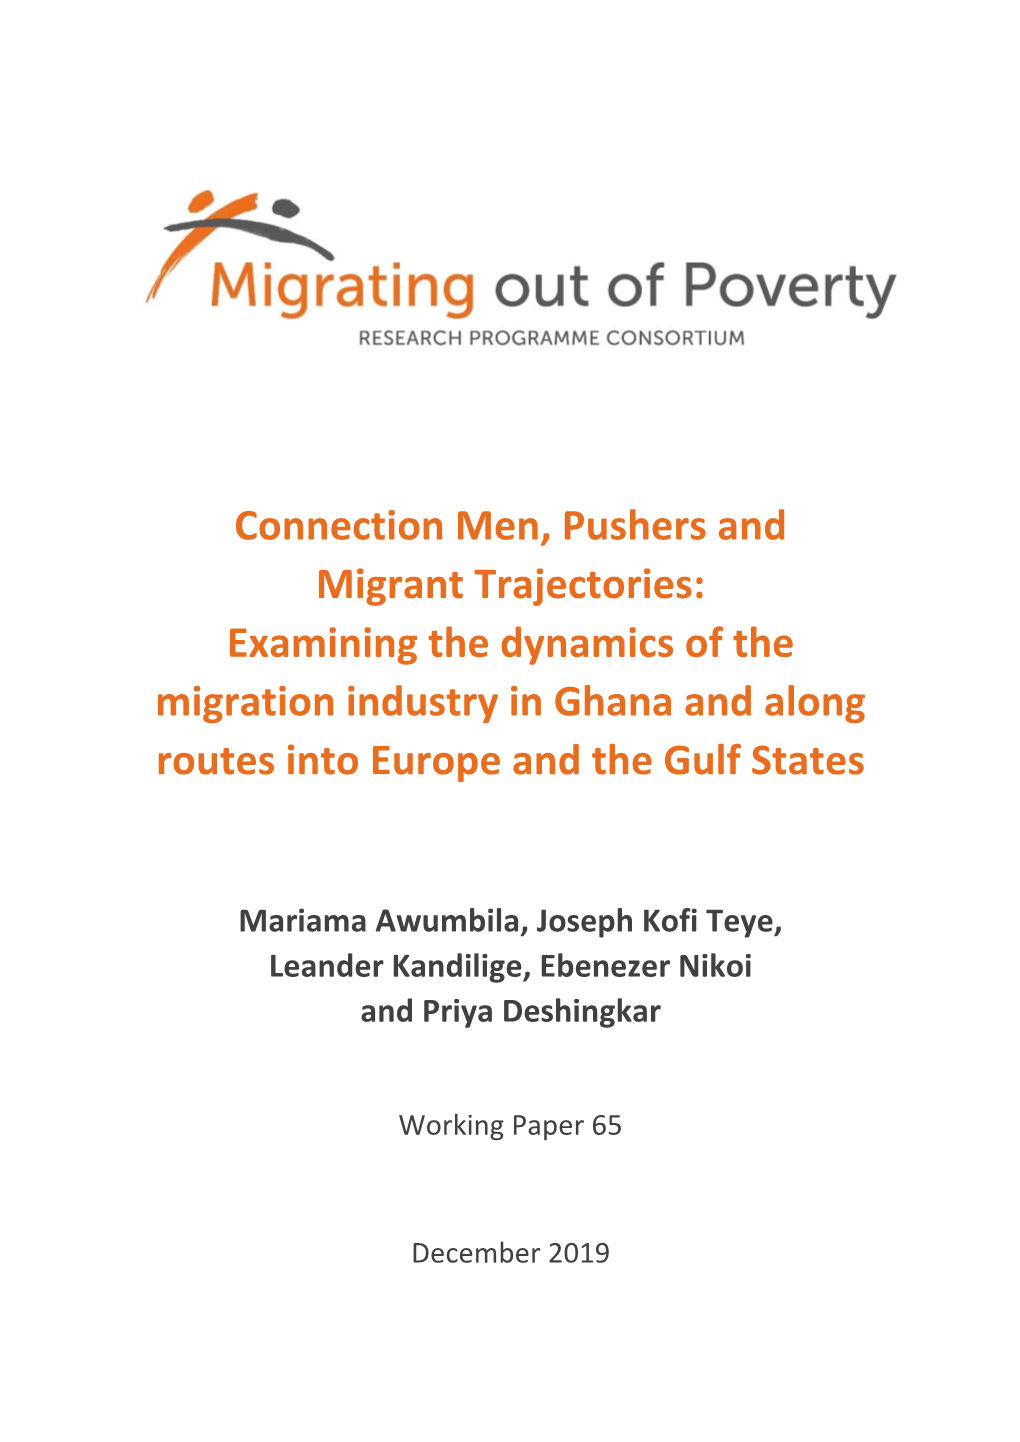 Connection Men, Pushers and Migrant Trajectories: Examining the Dynamics of the Migration Industry in Ghana and Along Routes Into Europe and the Gulf States